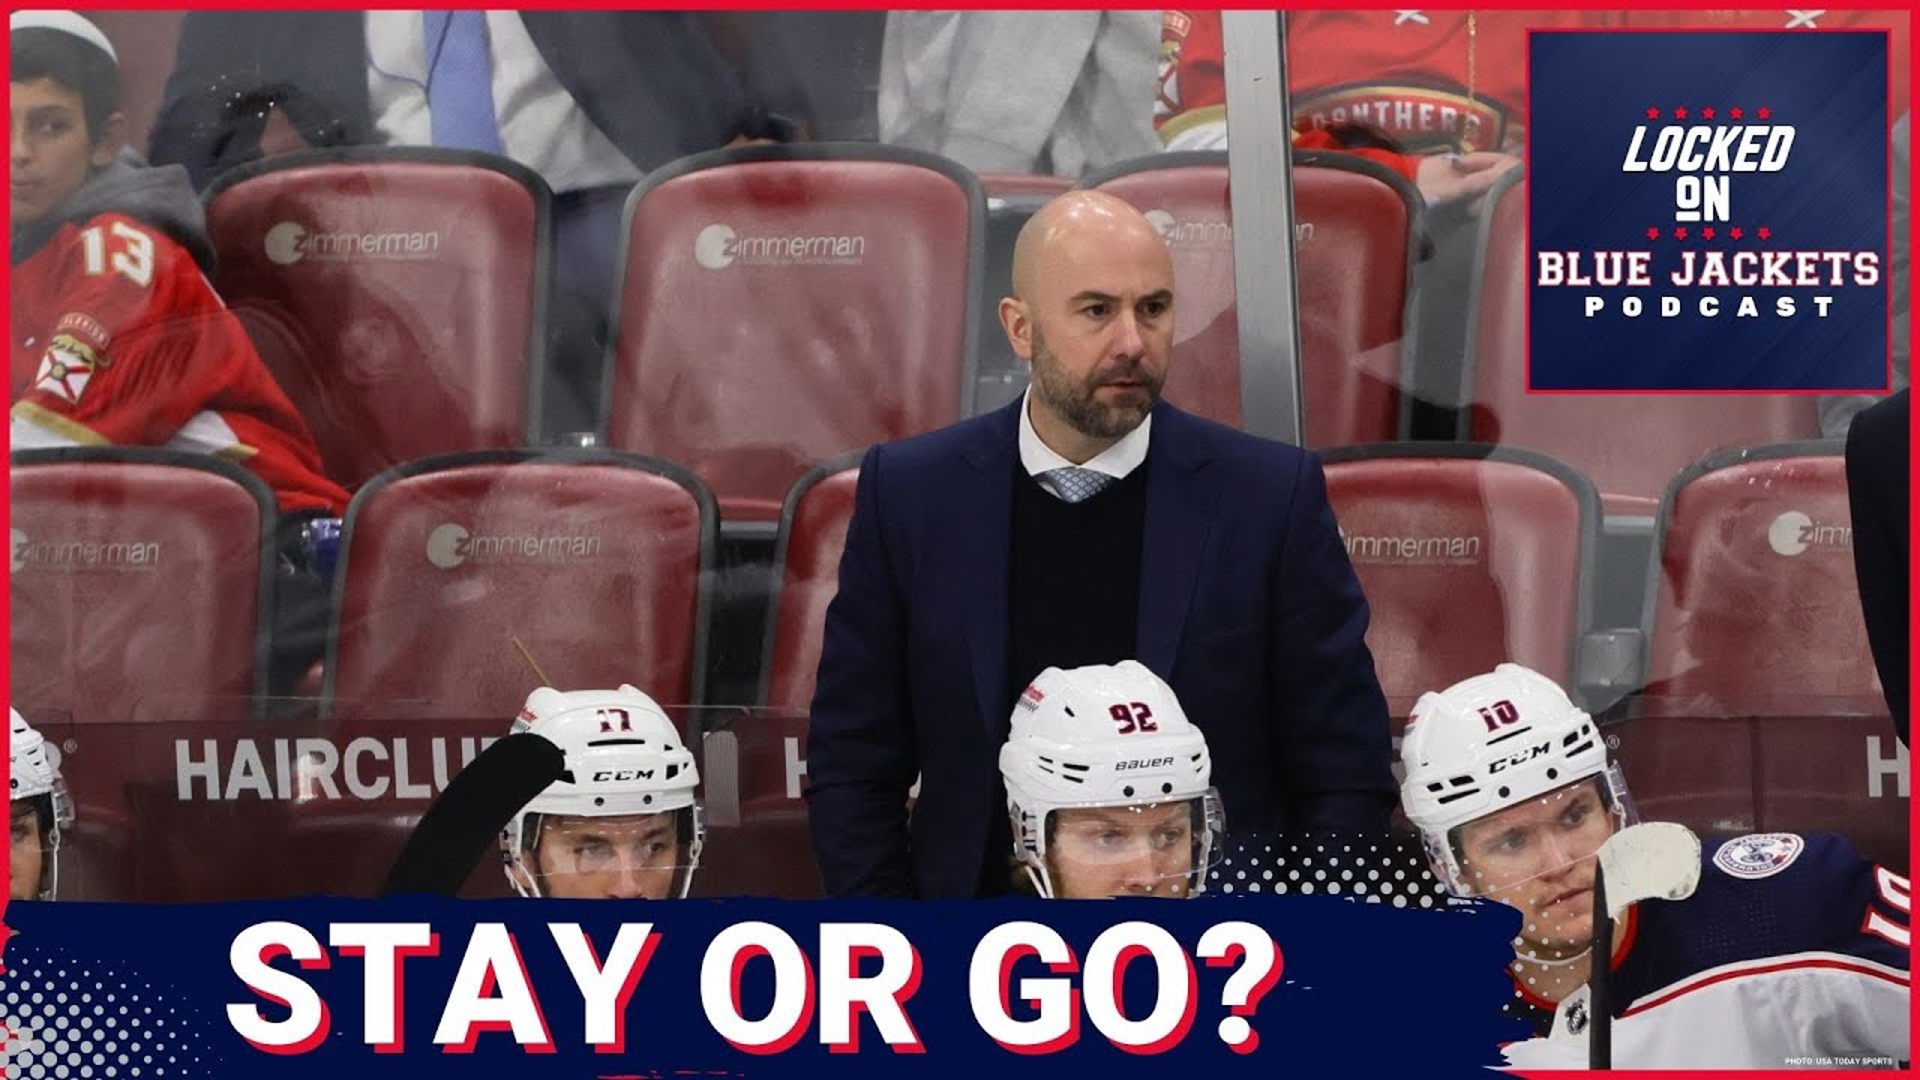 It's fair to say the Blue Jackets were kind of a tire fire this season, but how much of that was coaching-related?